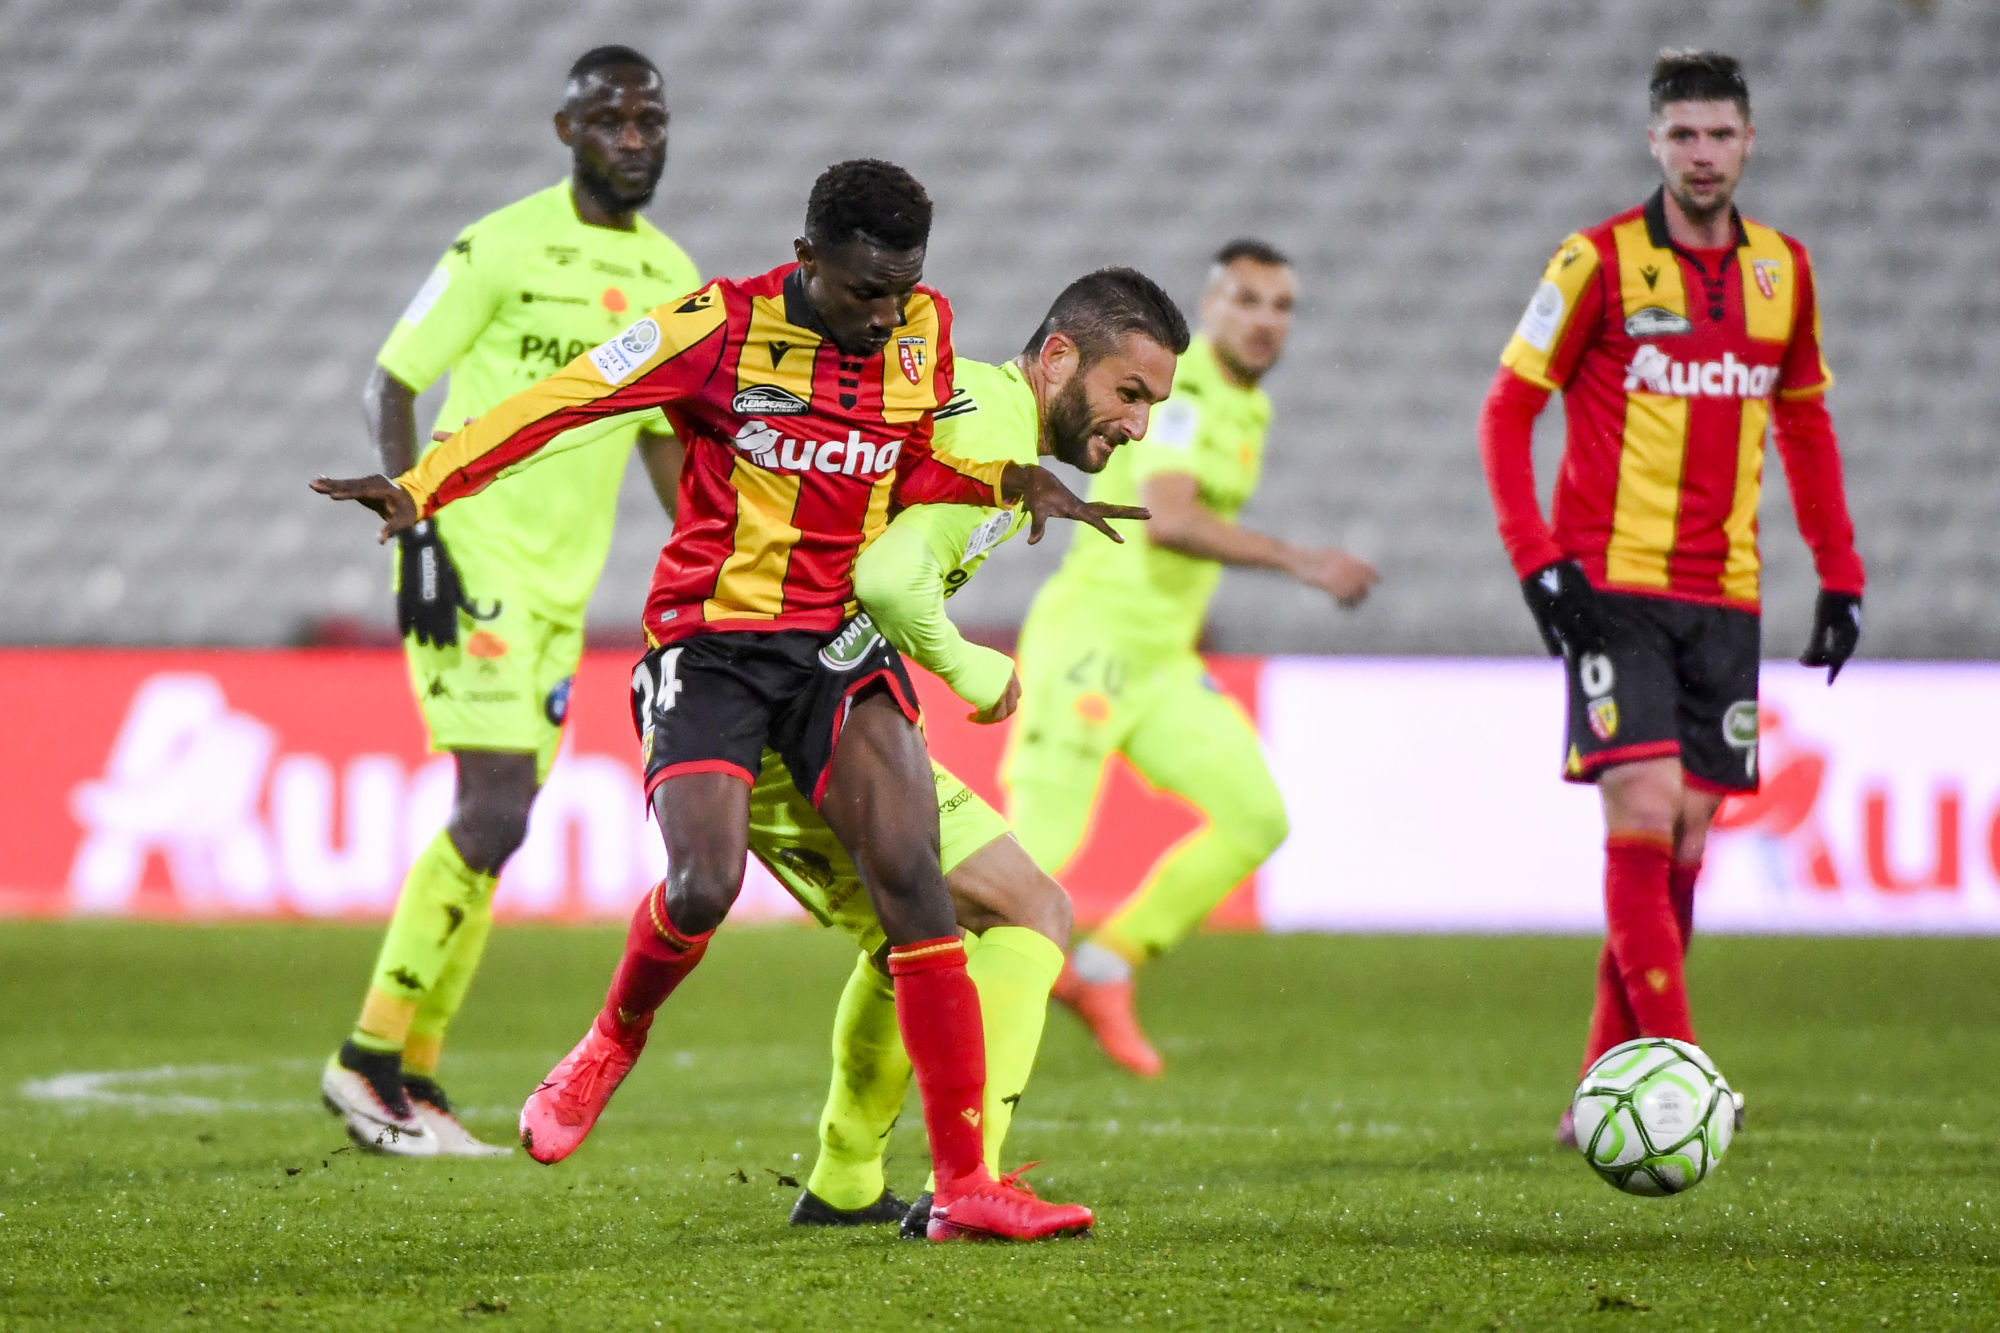 Jules KEITA of Lens and Cedric CAMBON of Orleans during the Ligue 2 match between Lens and Orleans at Stade Bollaert-Delelis on March 9, 2020 in Lens, France. (Photo by Aude Alcover/Icon Sport) - Cedric CAMBON - Jules KEITA - Stade Bollaert-Delelis - Lens (France)